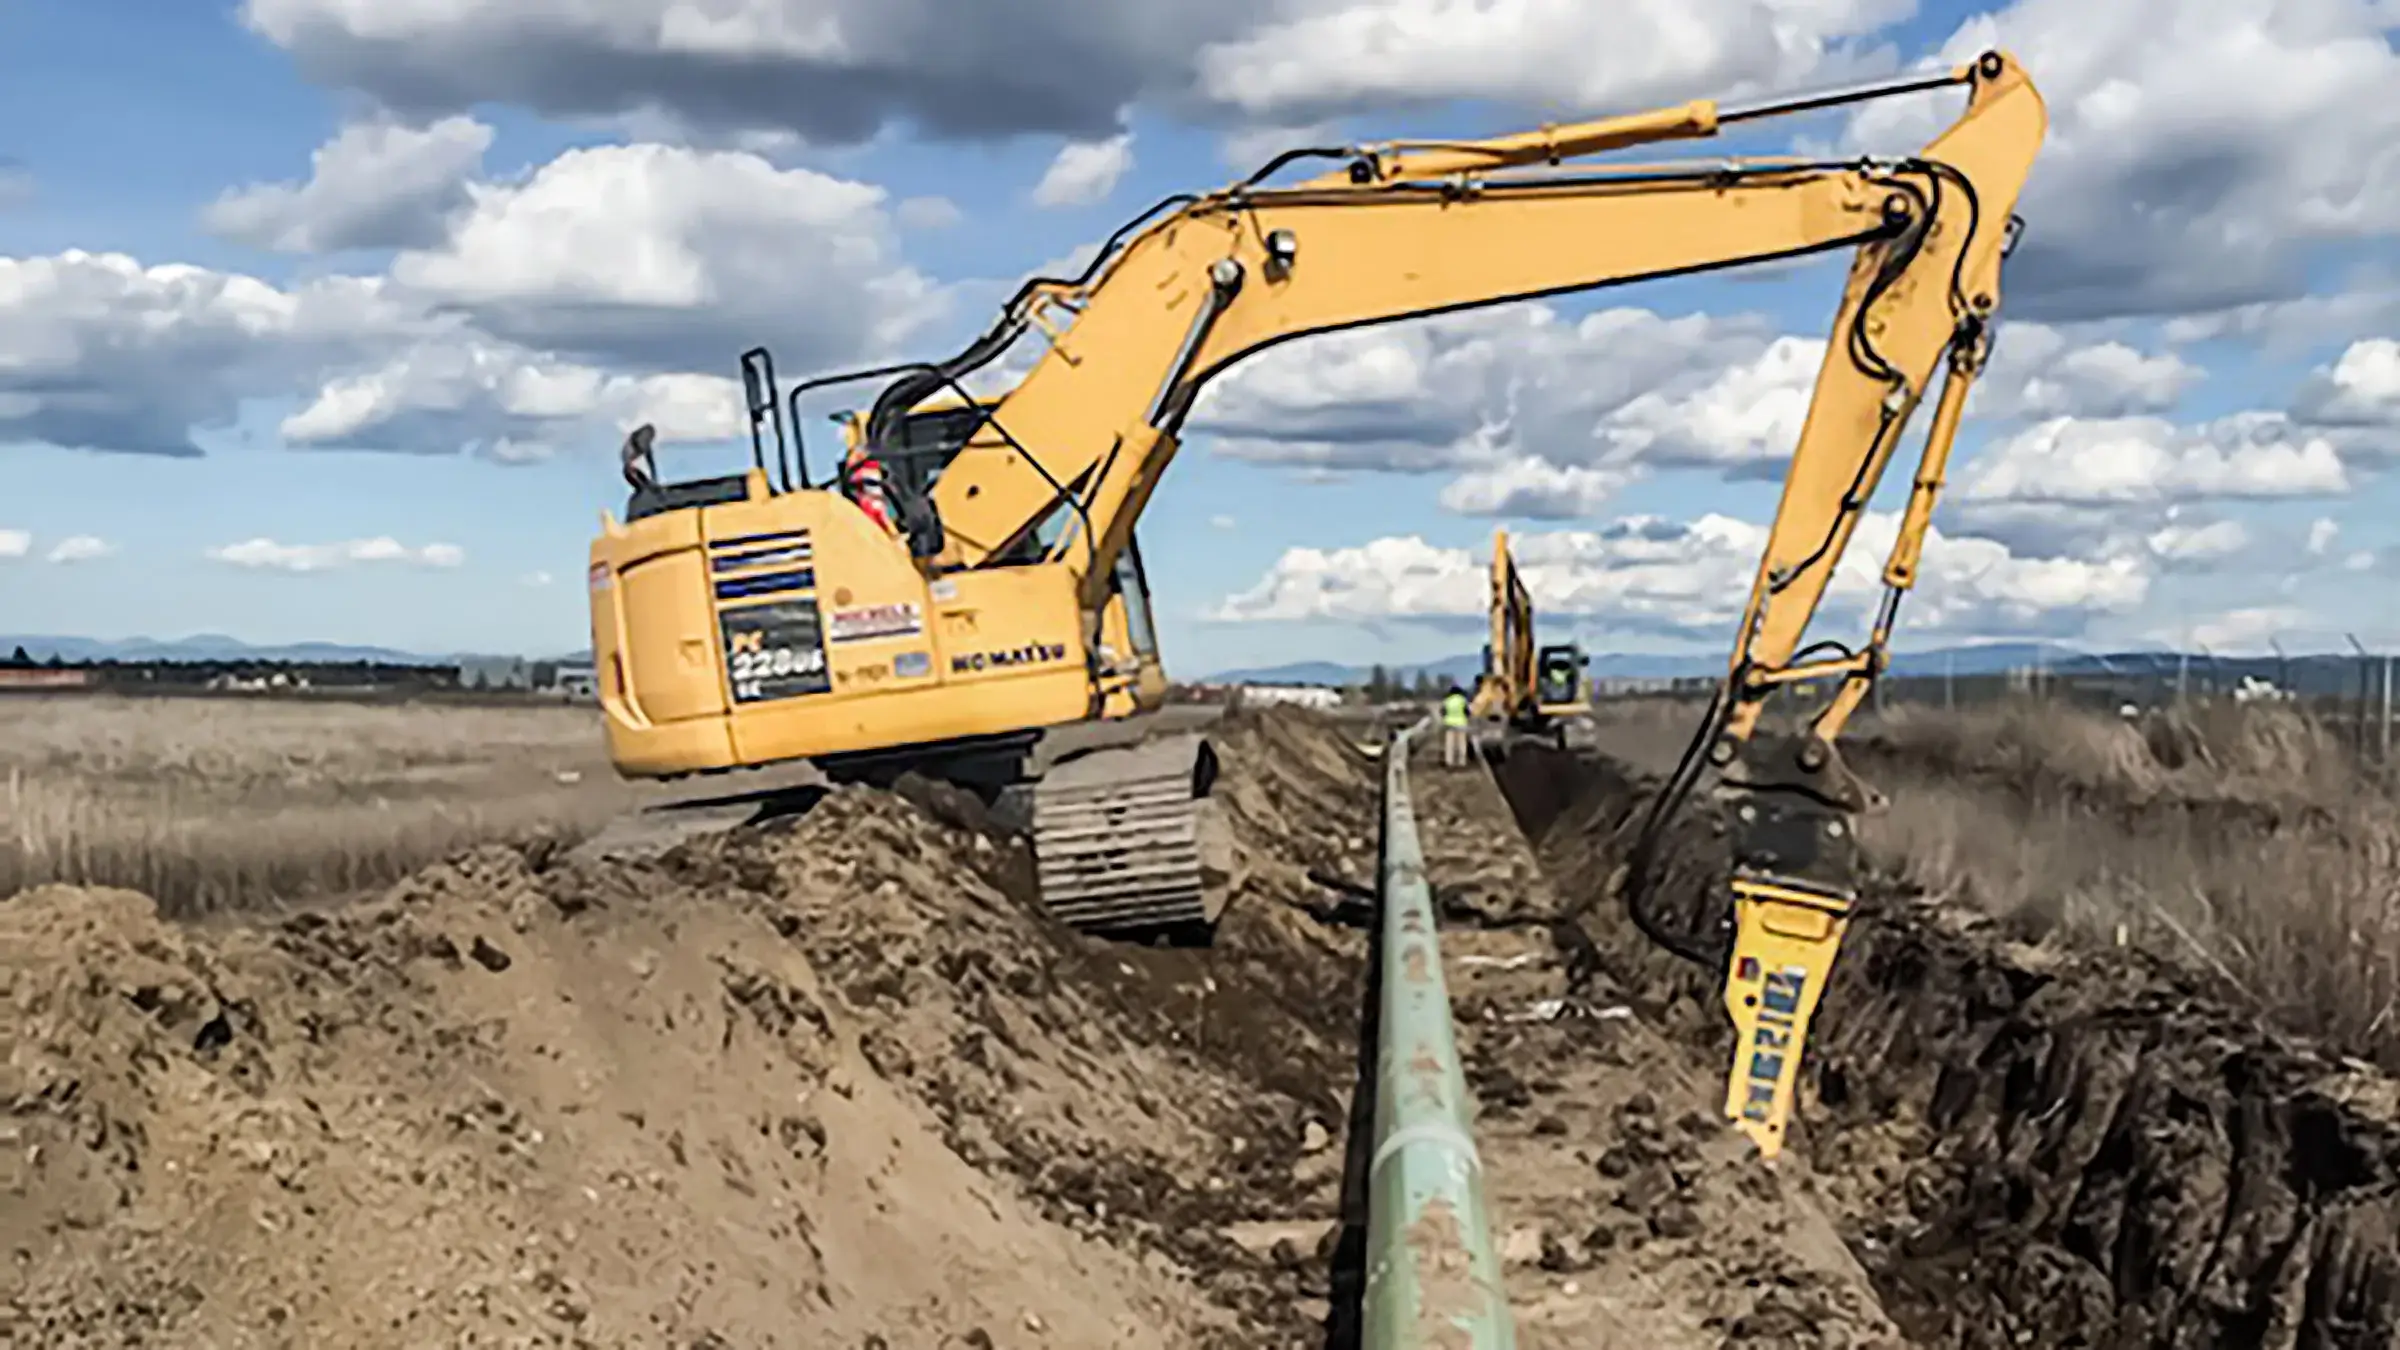 Several excavators assist in digging out a trench for a pipeline